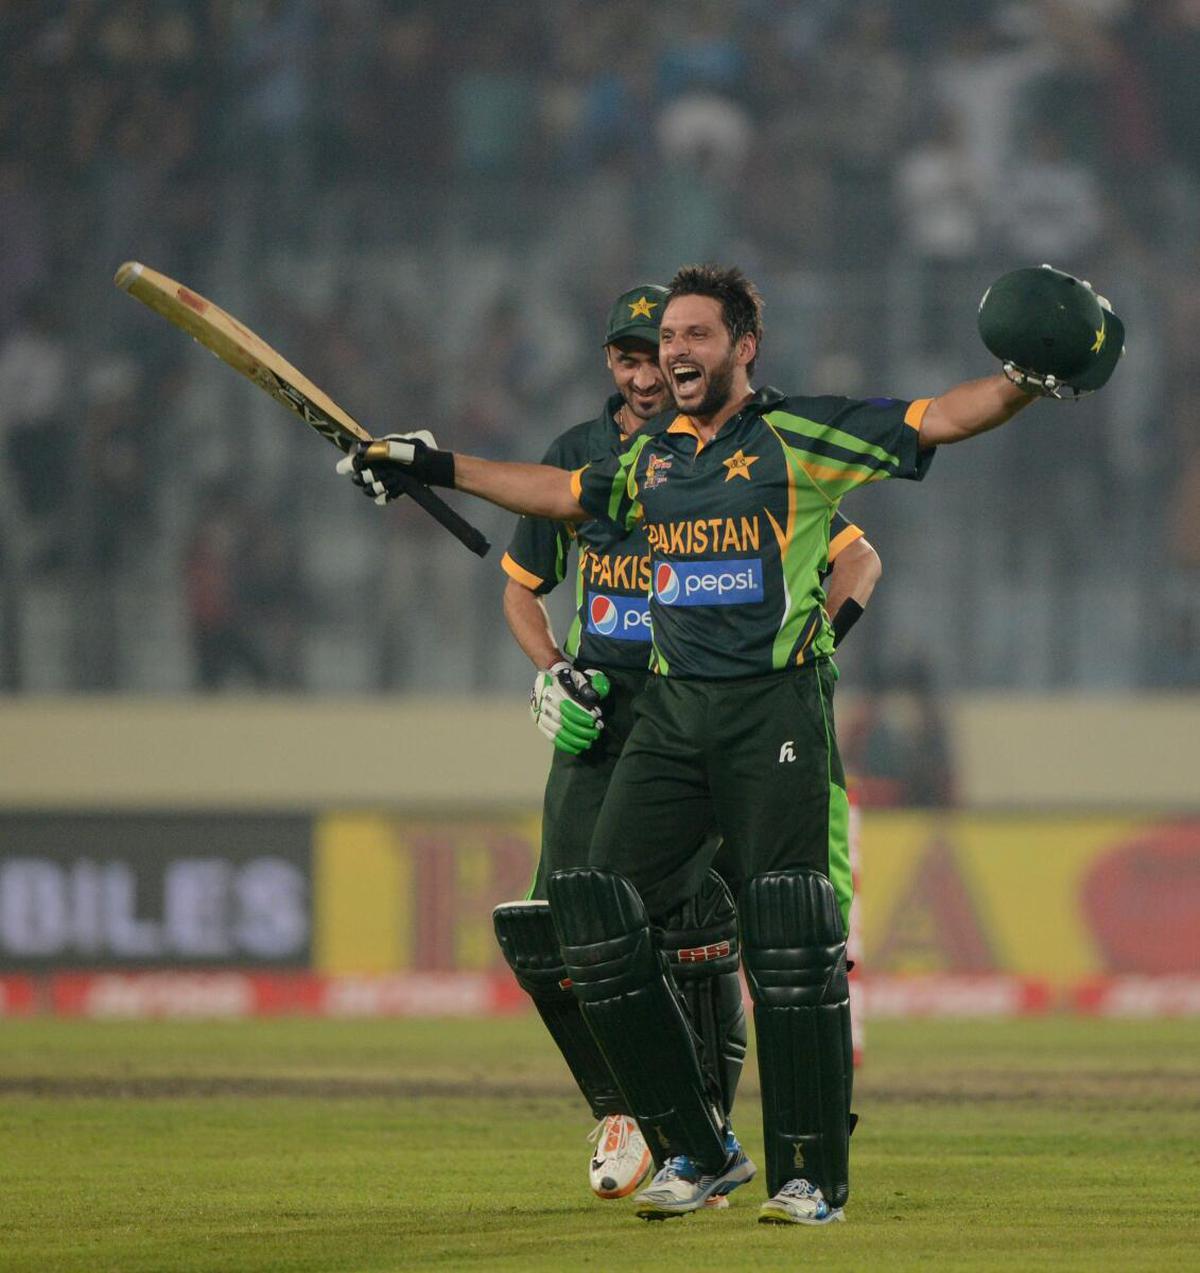 Pakistan’s Shahid Afridi and Junaid Khan react after winning the sixth match of the Asia Cup against India at the Sher-e-Bangla National Cricket Stadium in Dhaka on March 2, 2014. 